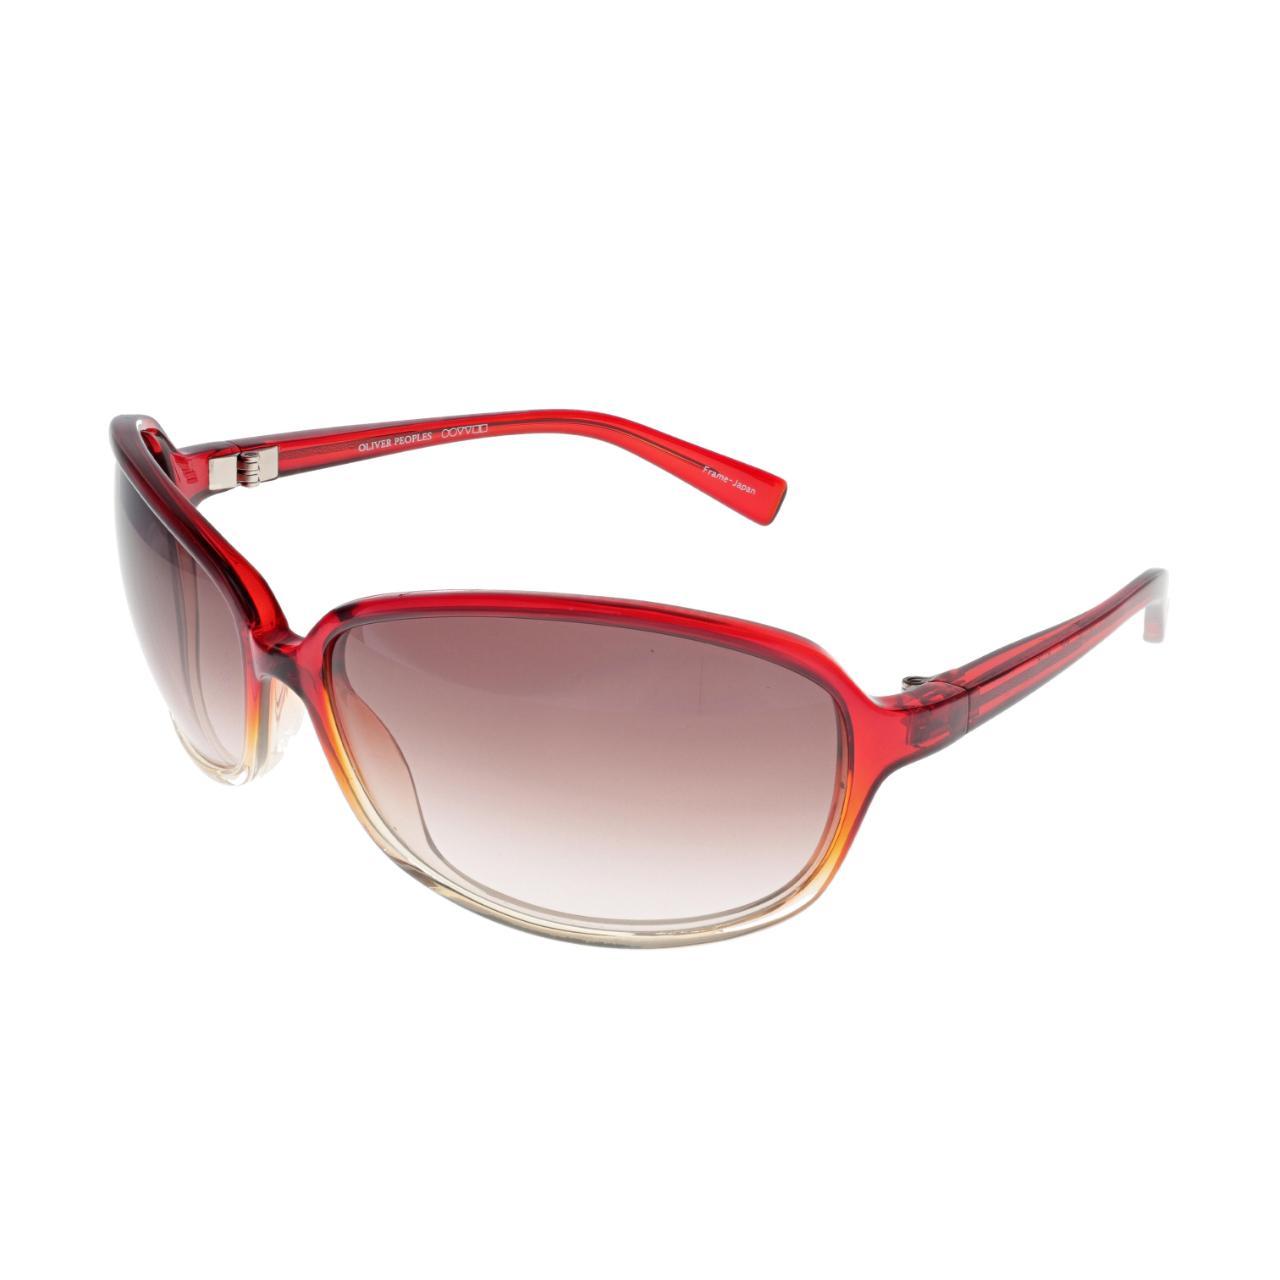 Oliver Peoples Women's Red and Brown Sunglasses